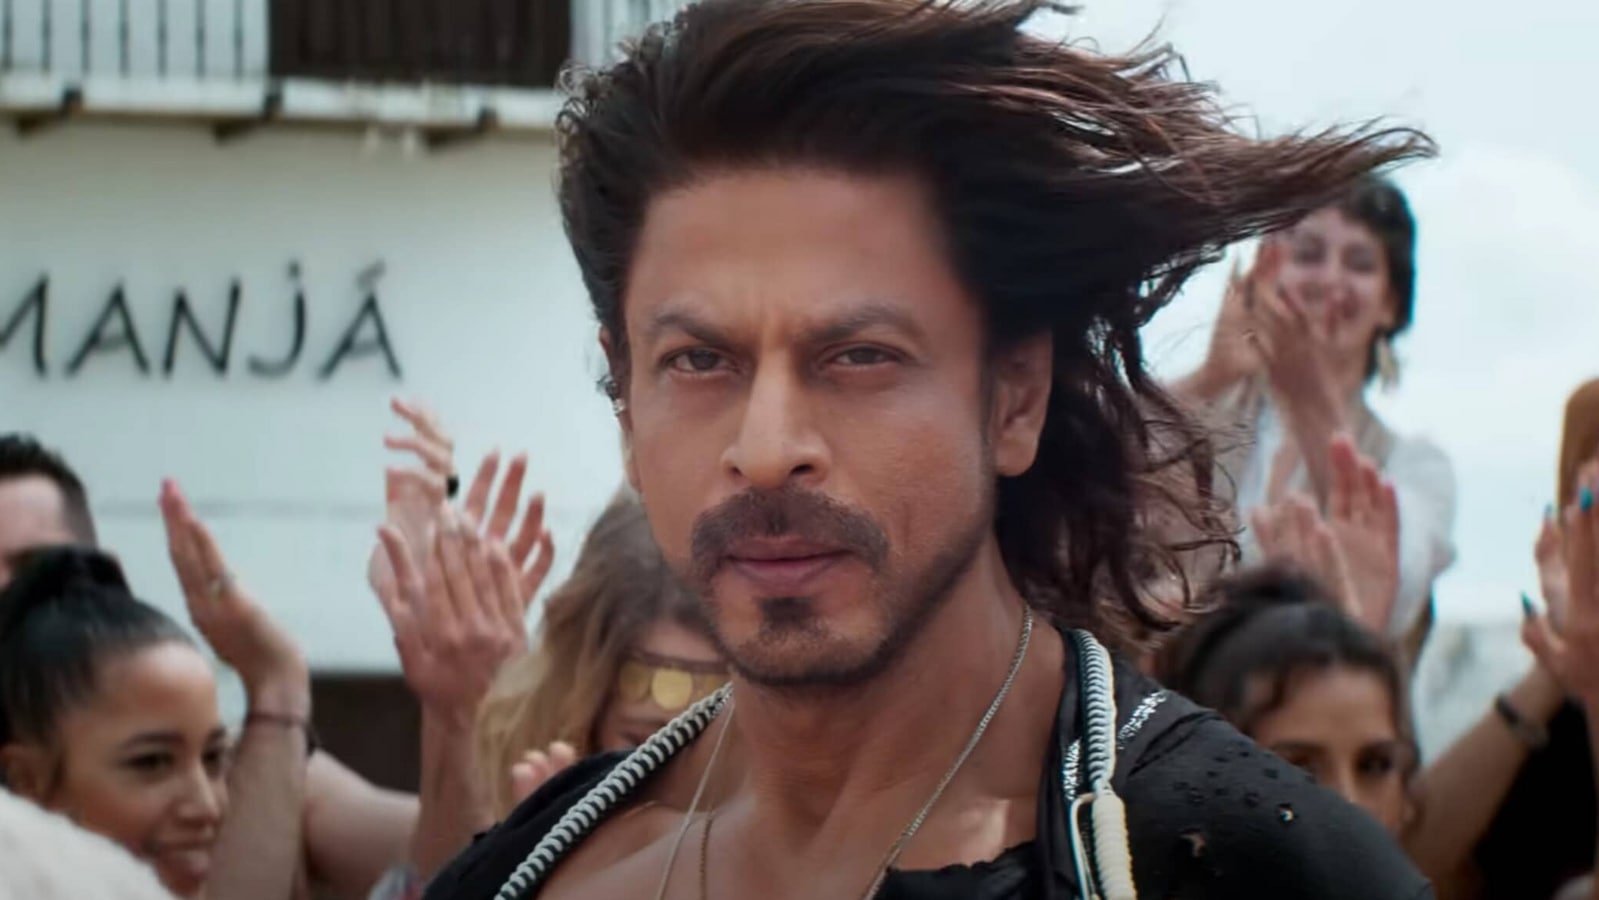 Pathaan box office collection: Shah Rukh Khan to break own records?